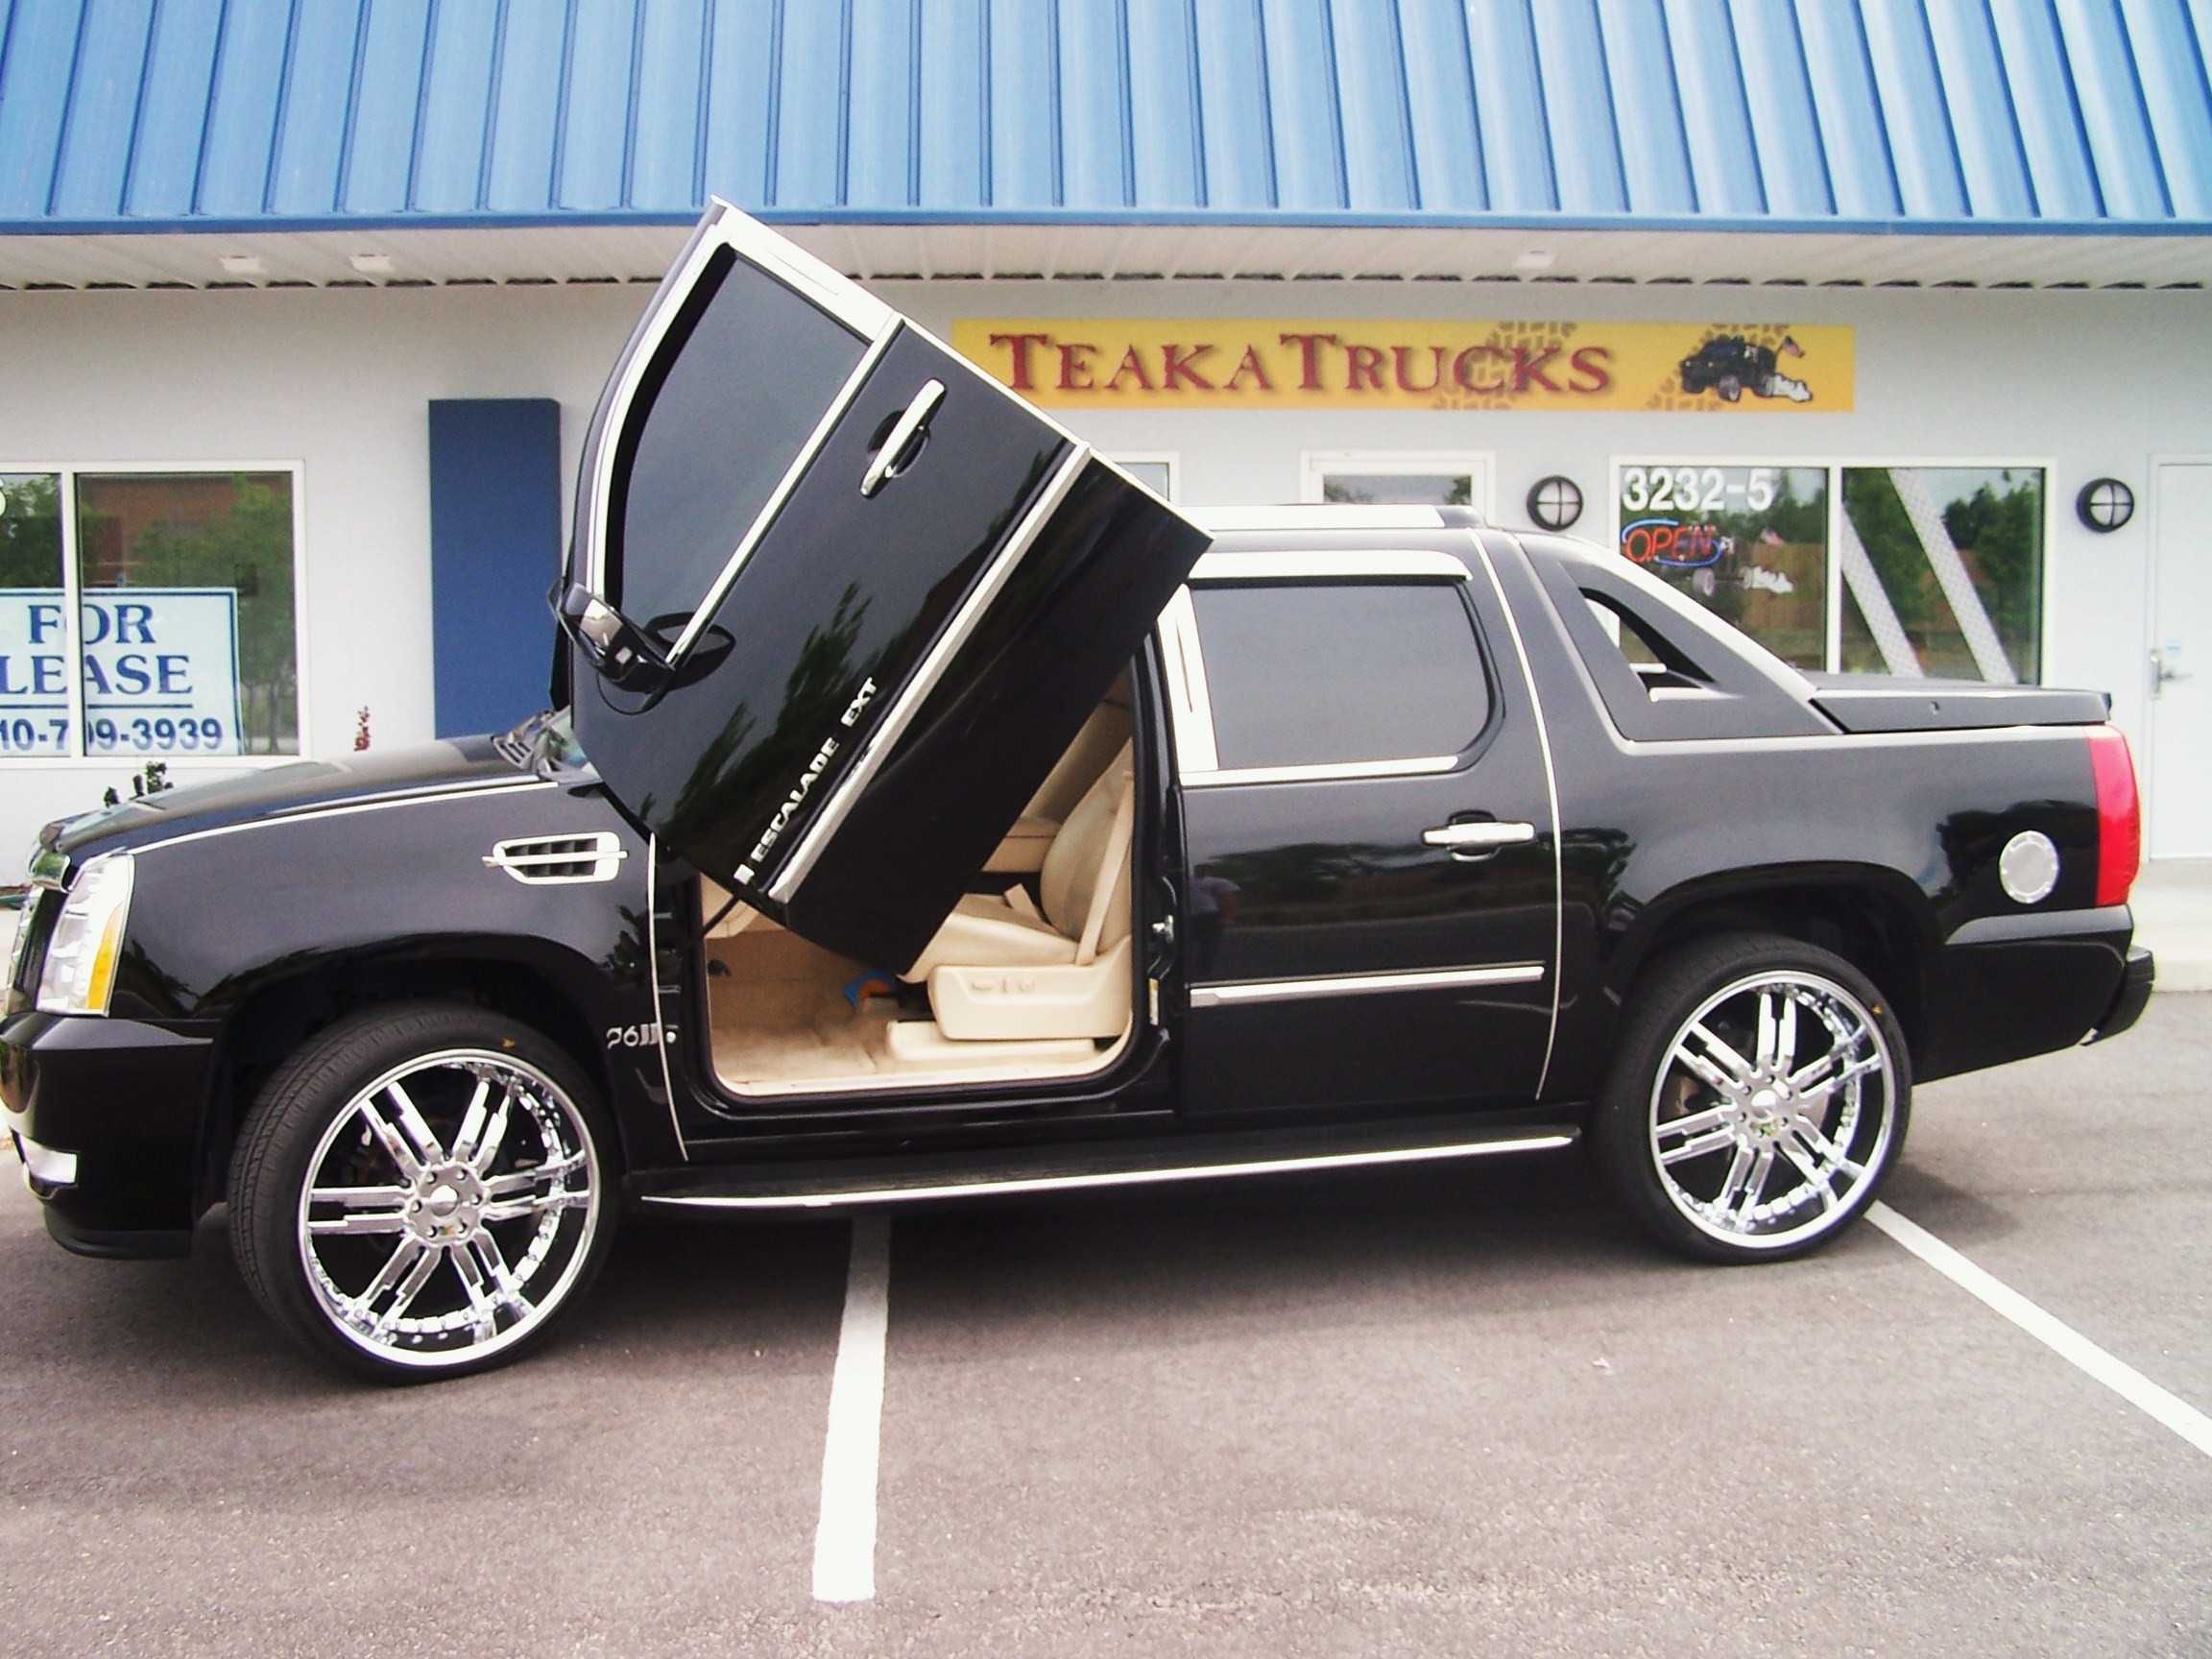 2304x1728 Cadillac Escalade Truck Lifted image #133